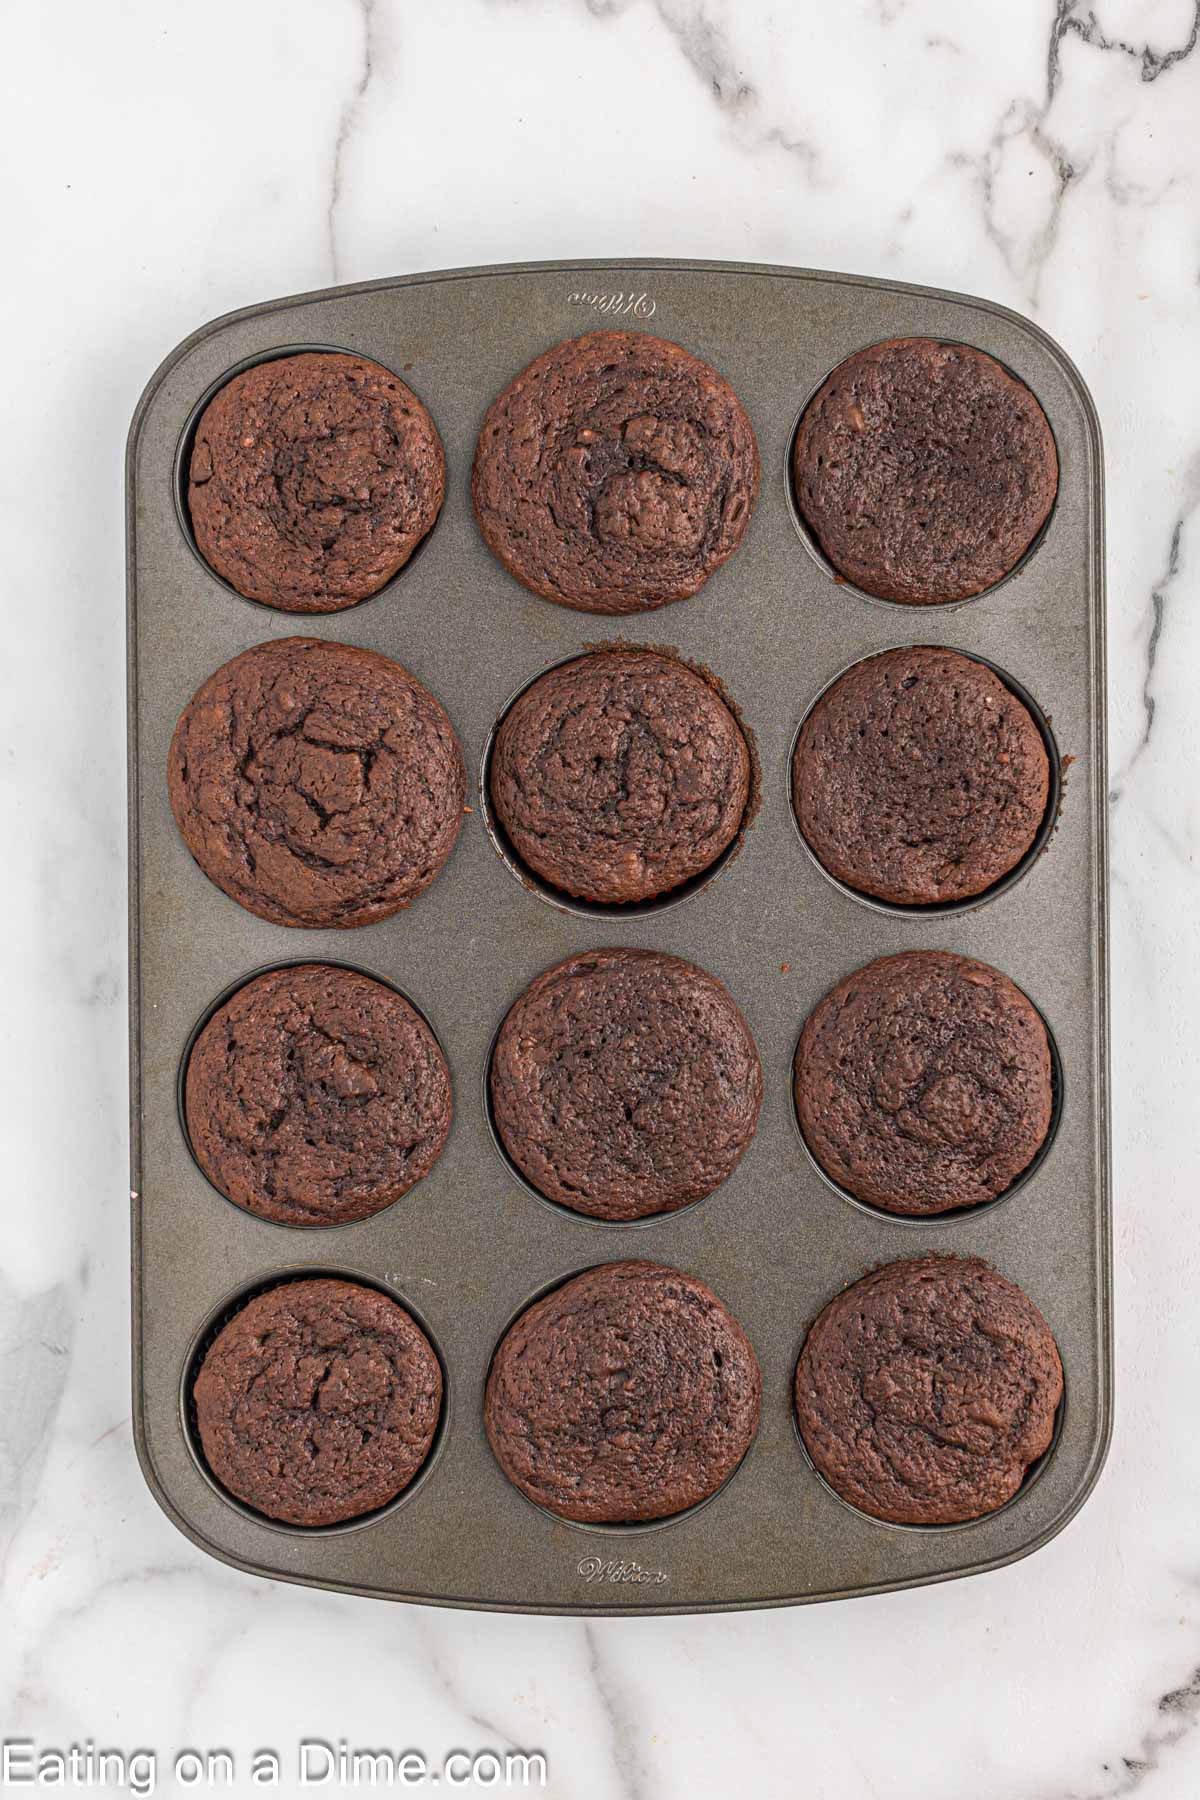 Baked cupcakes in the cupcake pan